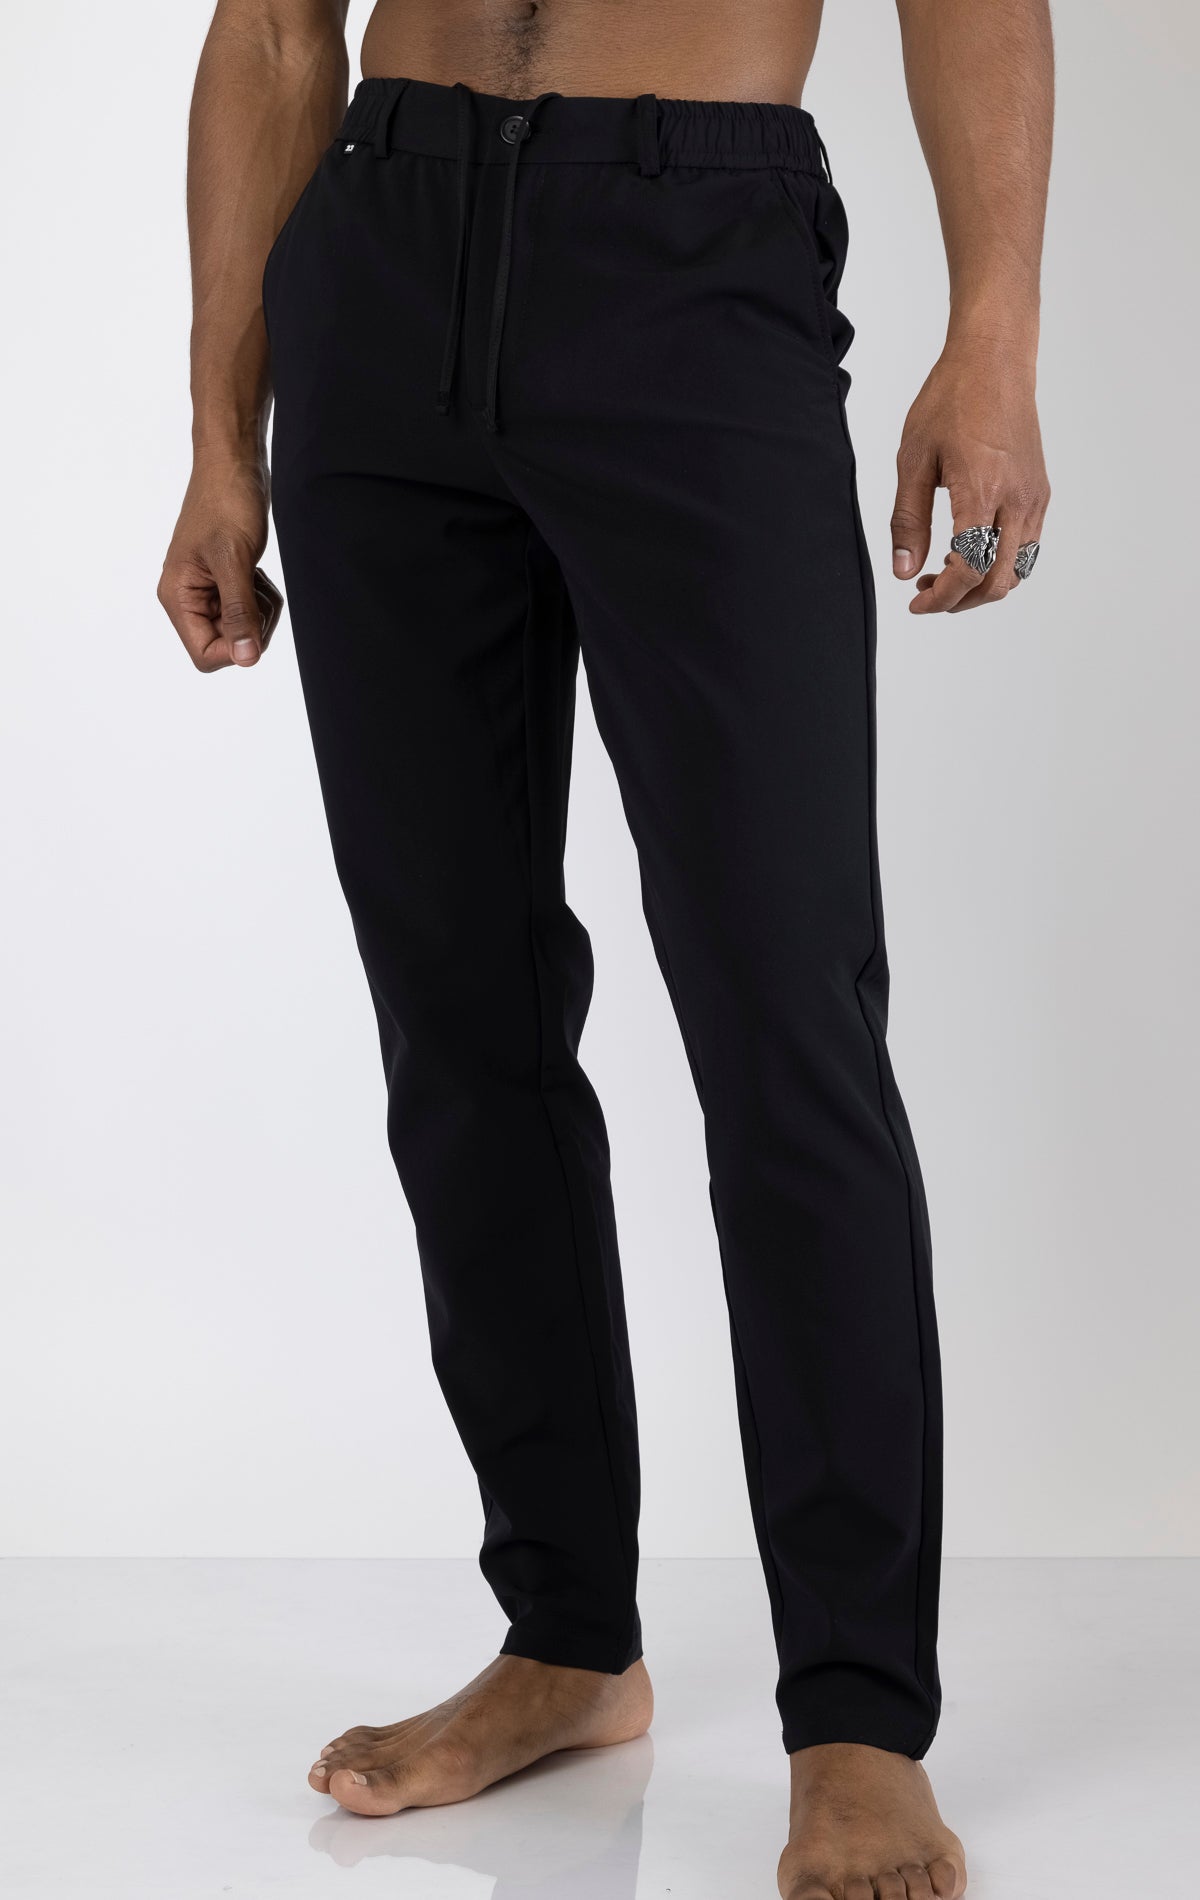 Men's wrinkle-free tapered travel pants in black. The pants are made from a blend of polyamide (88%) and elastane (12%) and feature a tapered fit, wrinkle-resistant fabric, and multiple pockets.